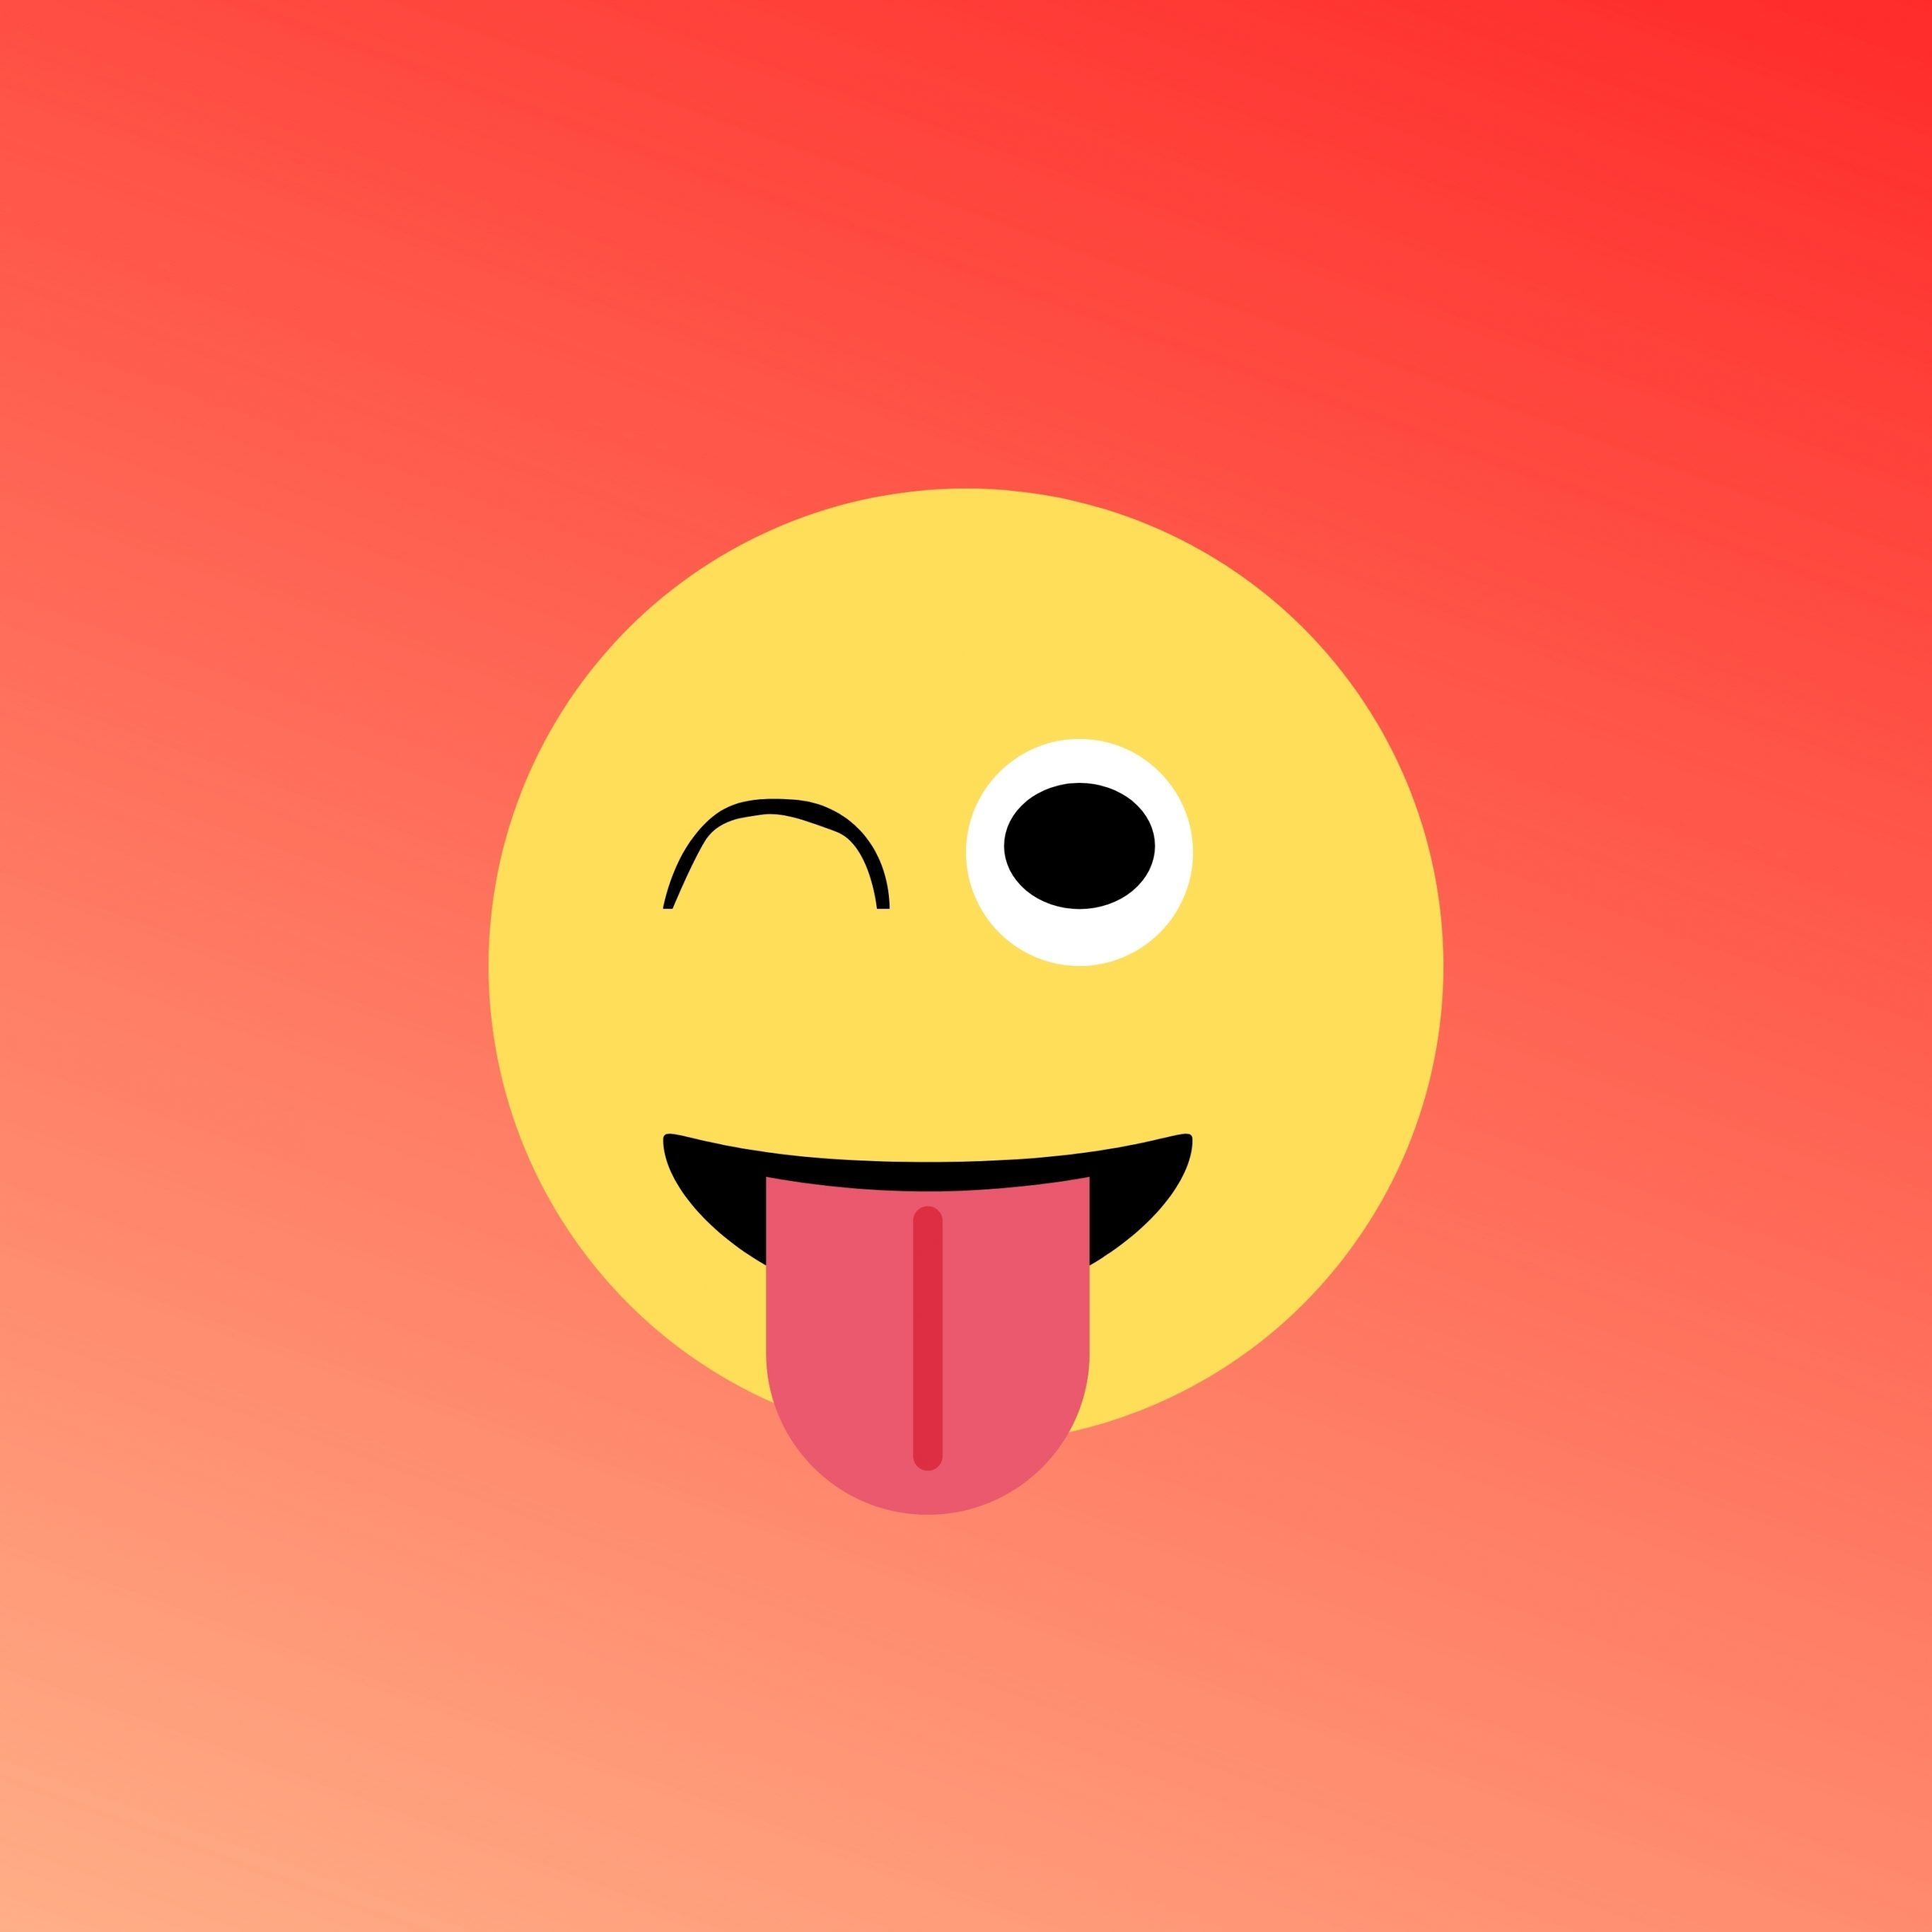 2732x2732 wallpapers 4k iPad Pro Winking Face Tongue Red Background iPad Wallpaper 2732x2732 pixels resolution